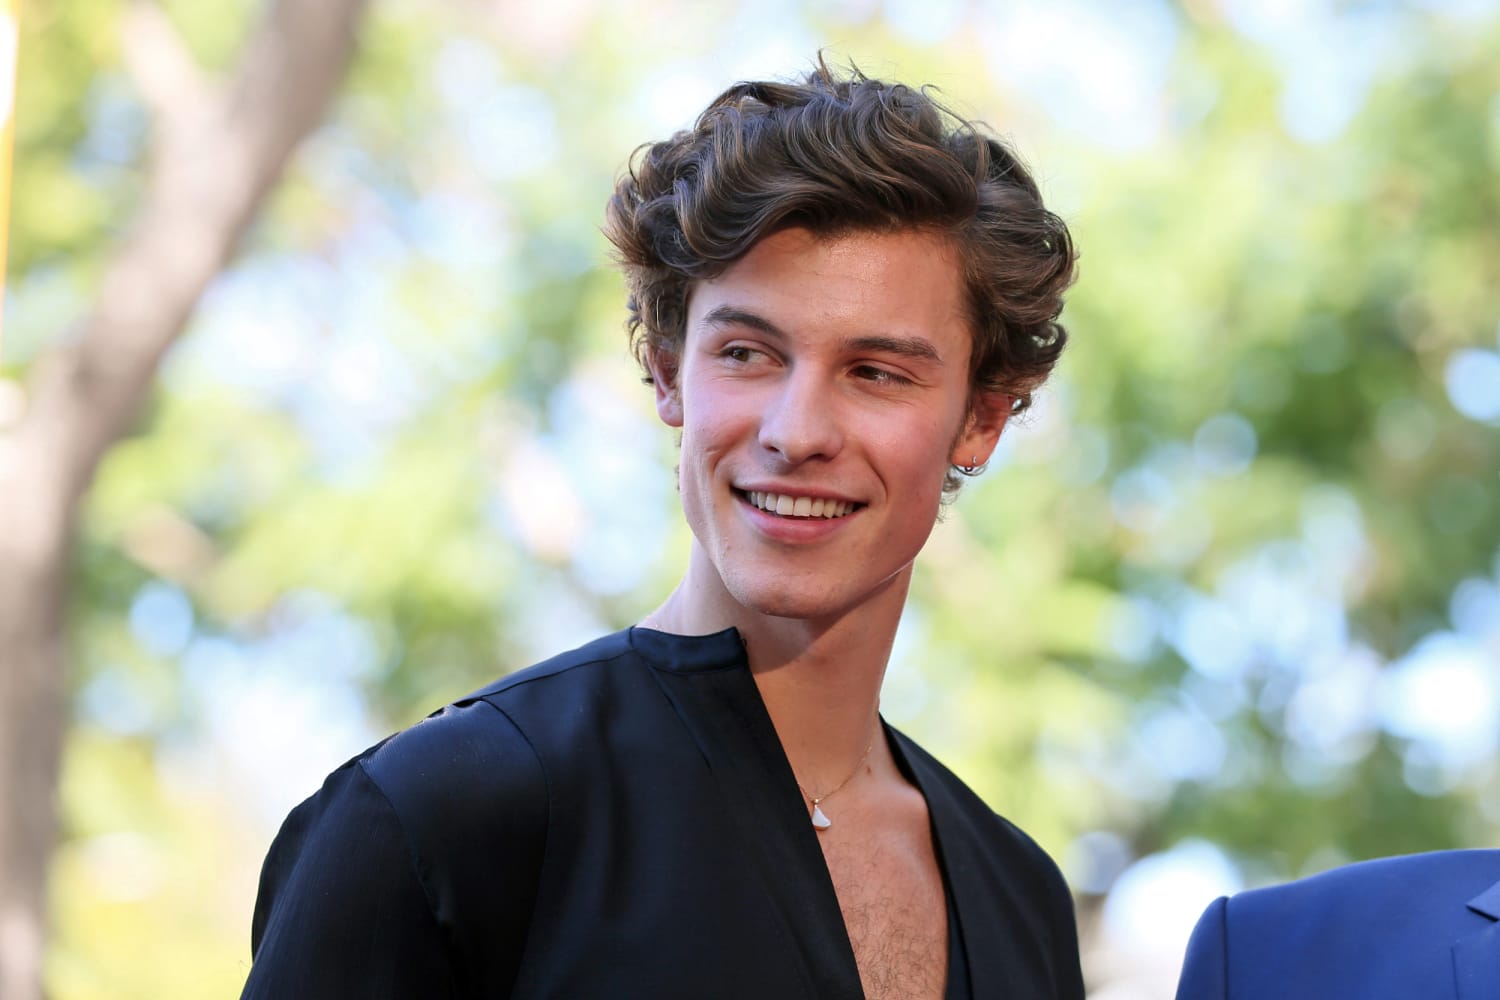 Gaydar' or 'wishdar'? The danger in obsessing over Shawn Mendes' sexuality